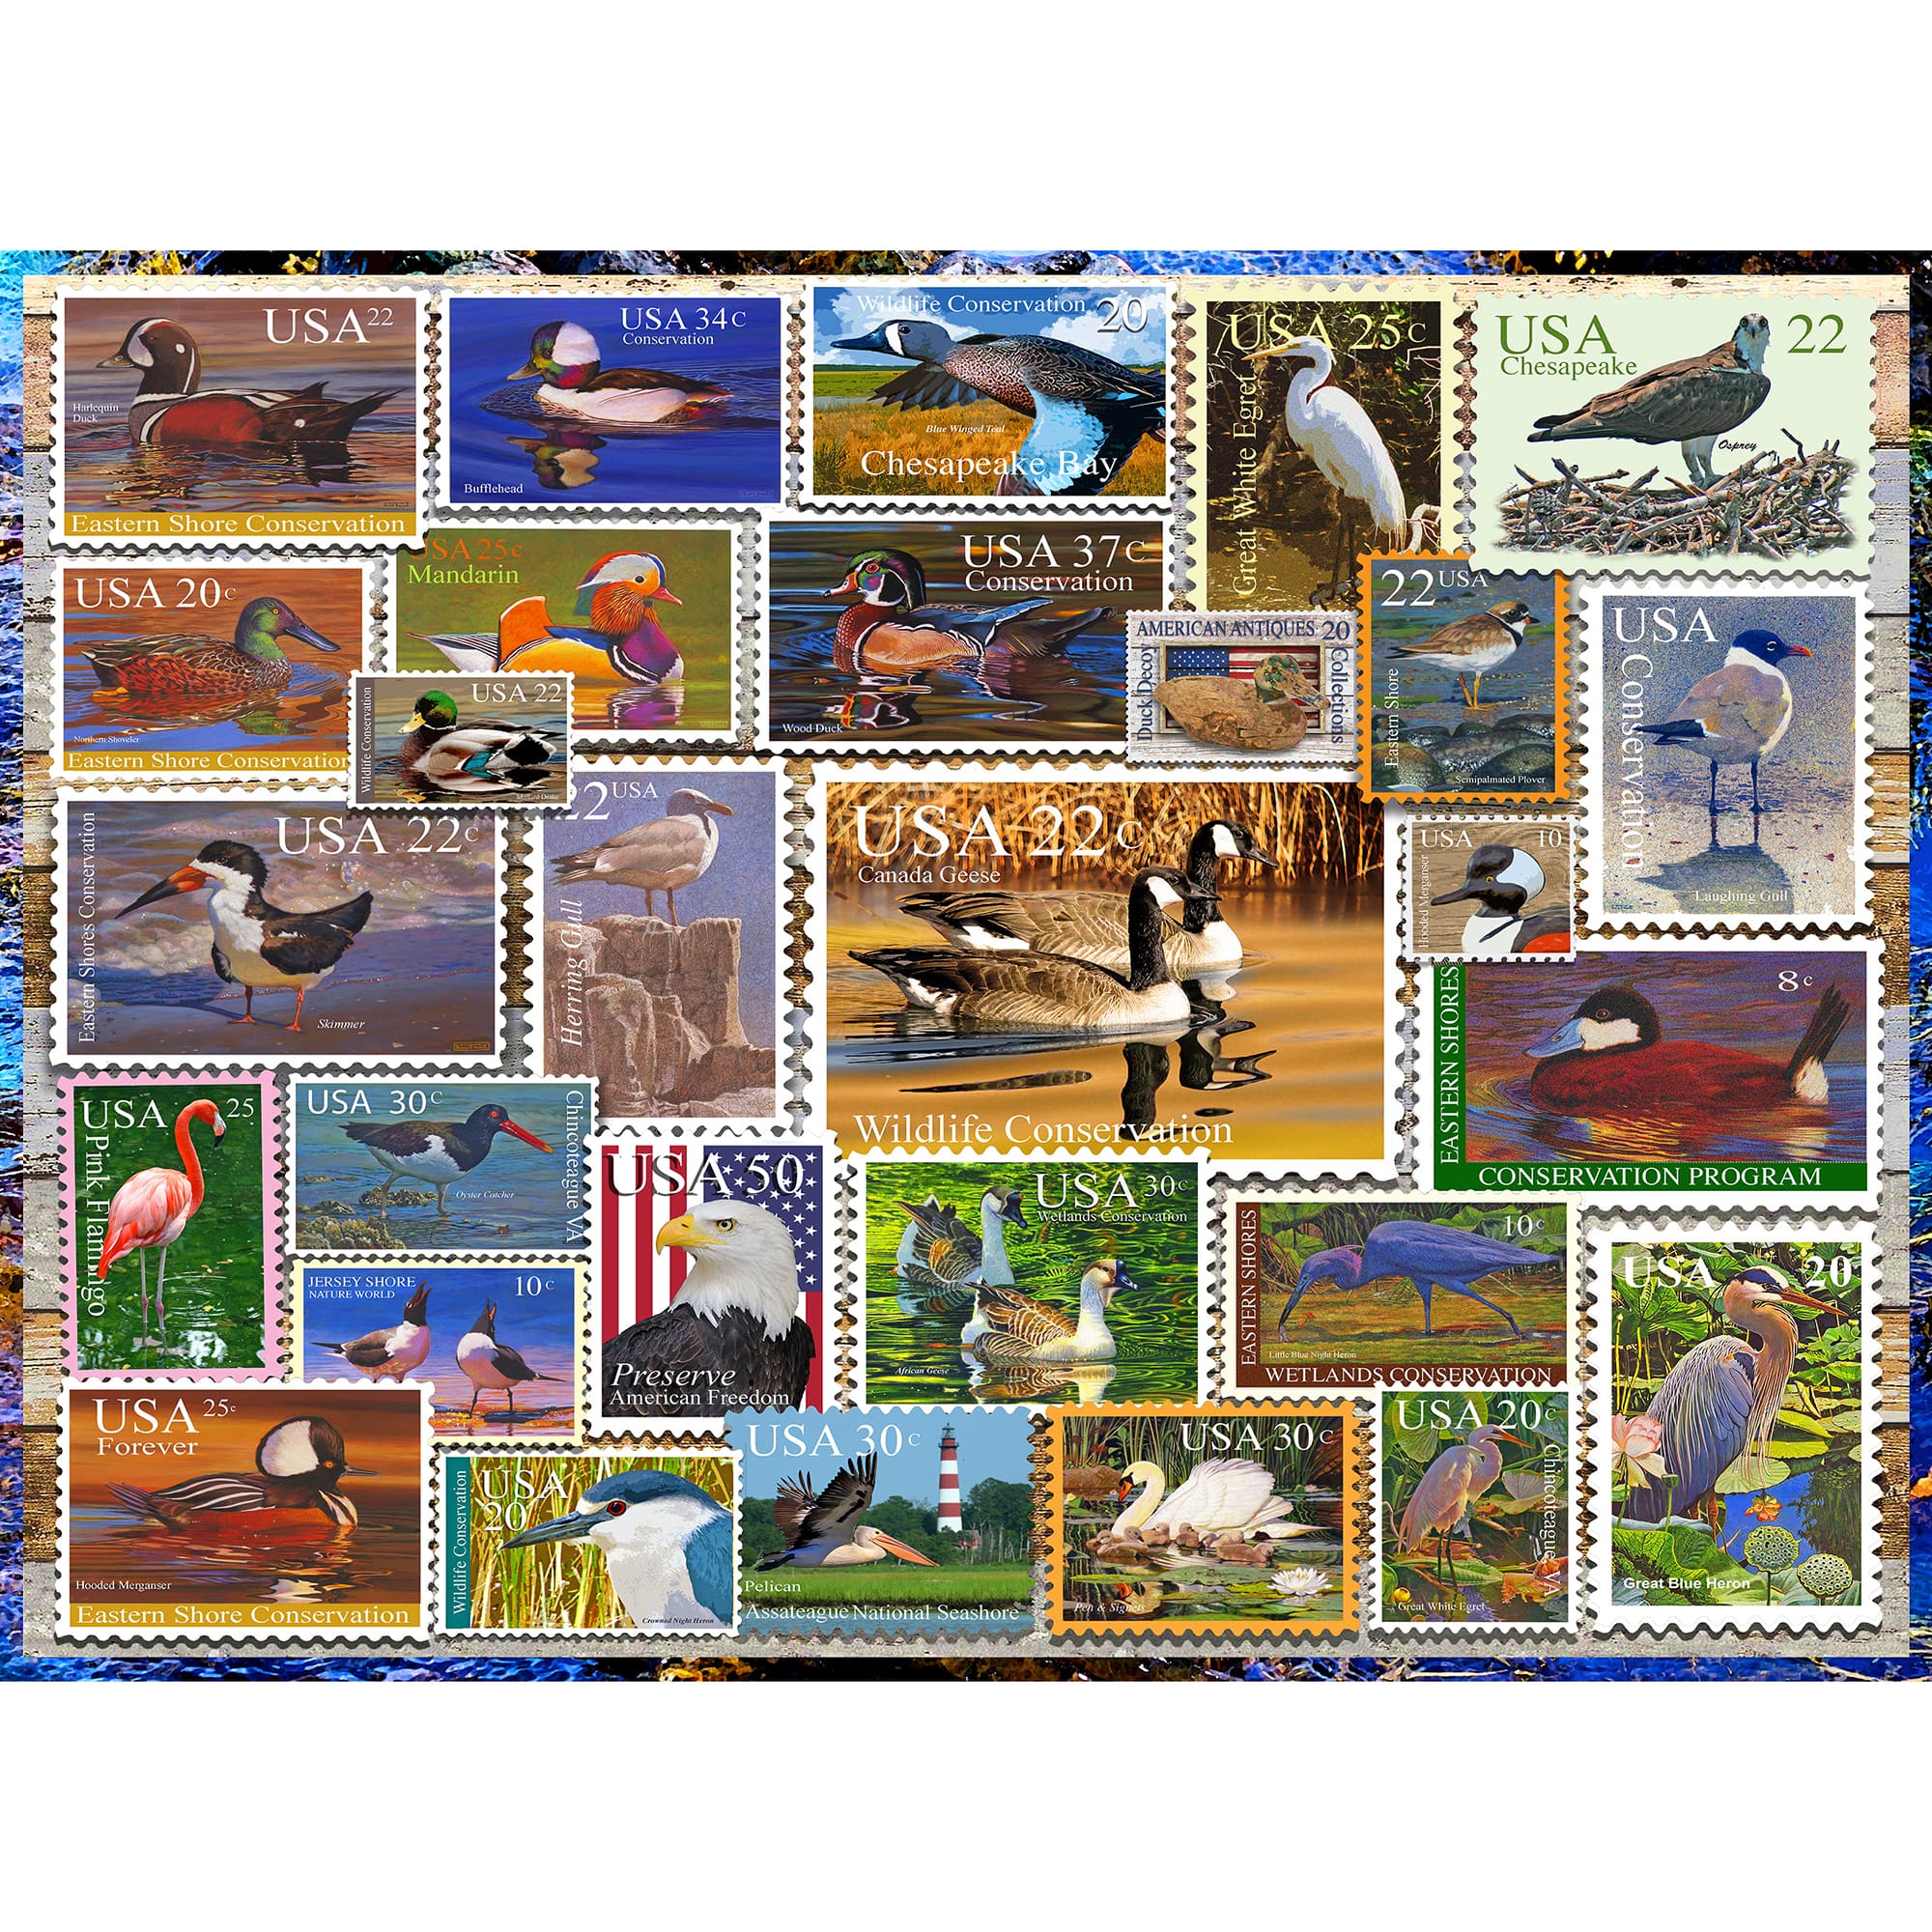 Birds of Our Shores Stamps 1,000 Piece Puzzle